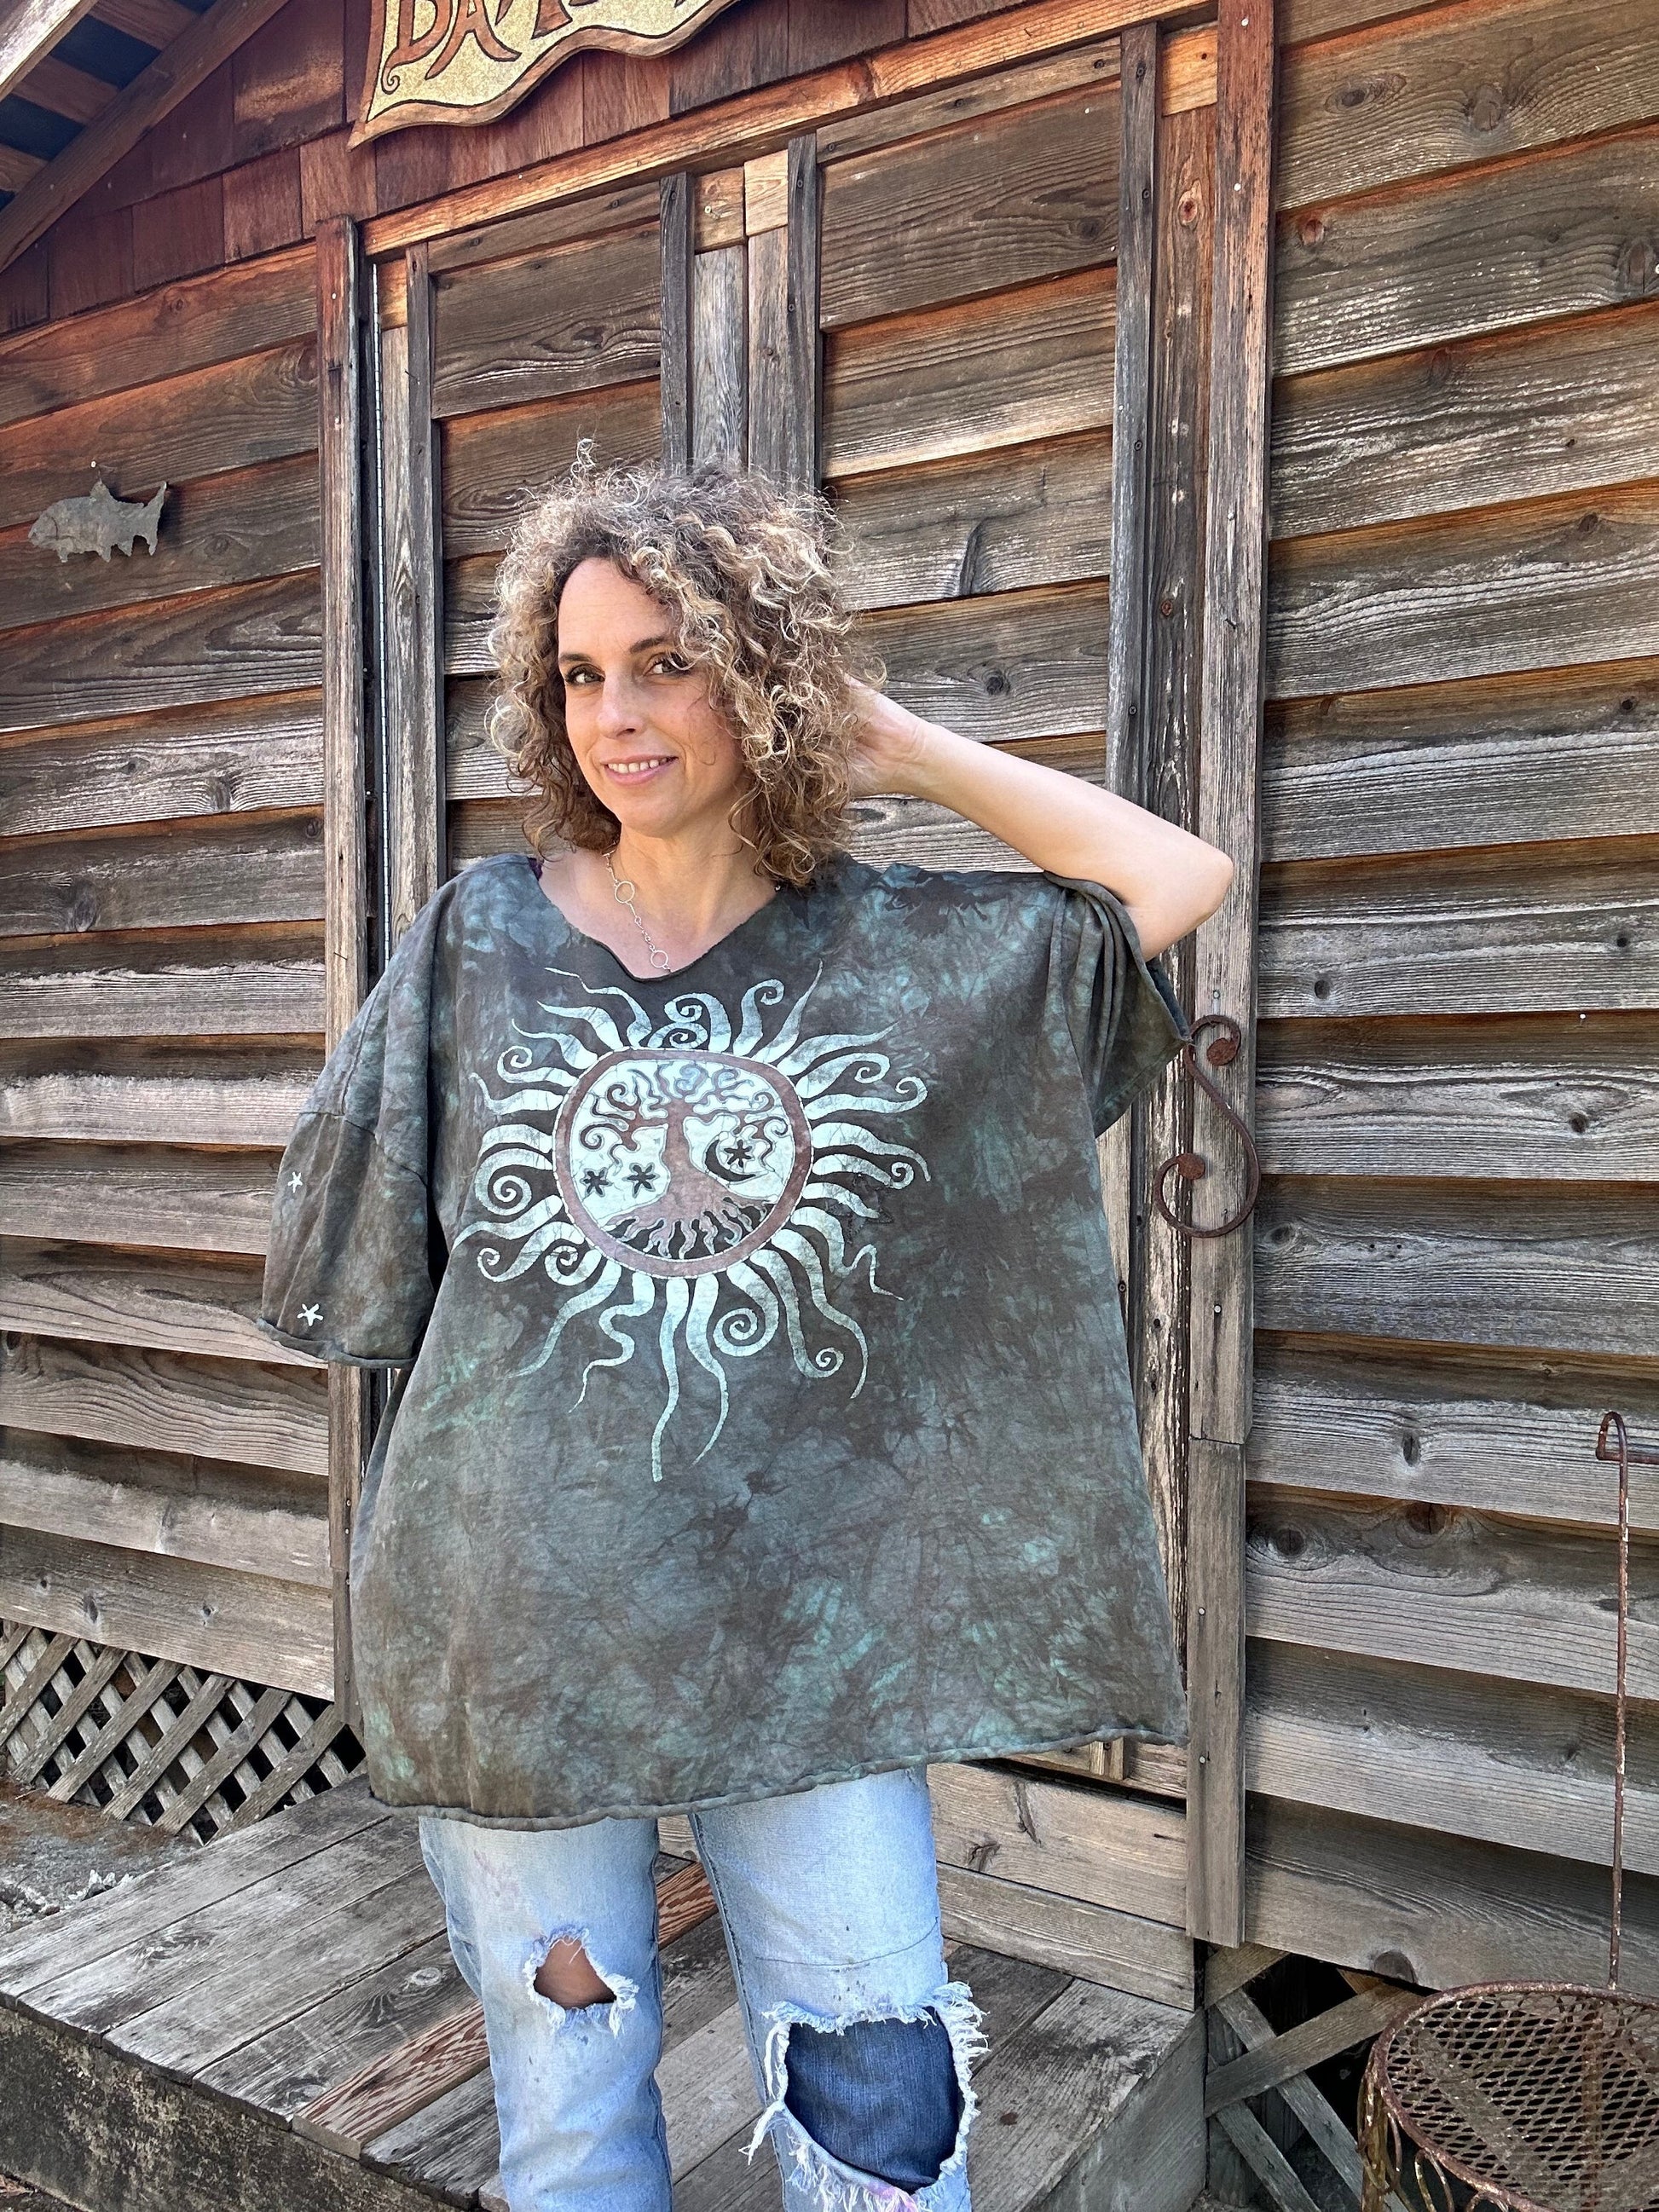 Cedar Forest Tree of Life Cotton Cropped Crew Tee - Size 2X and 3X Shirts & Tops Batikwalla by Victoria 3X 